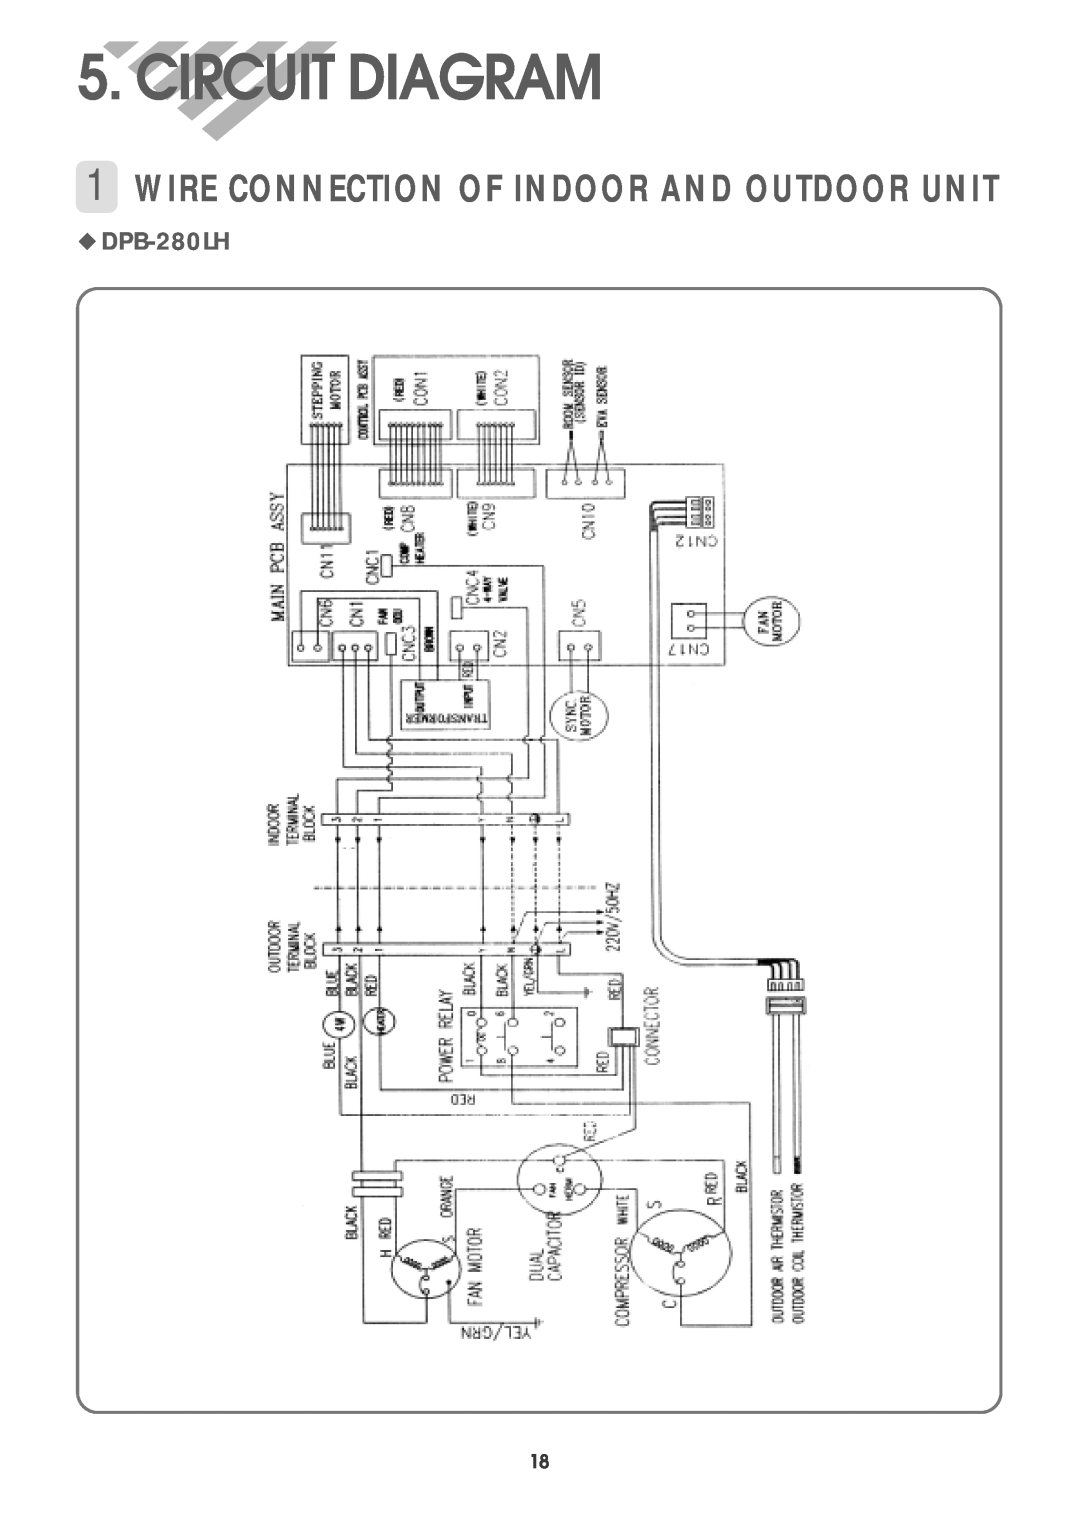 Daewoo DPB-280LH service manual Circuit Diagram, 1WIRE CONNECTION OF INDOOR AND OUTDOOR UNIT 